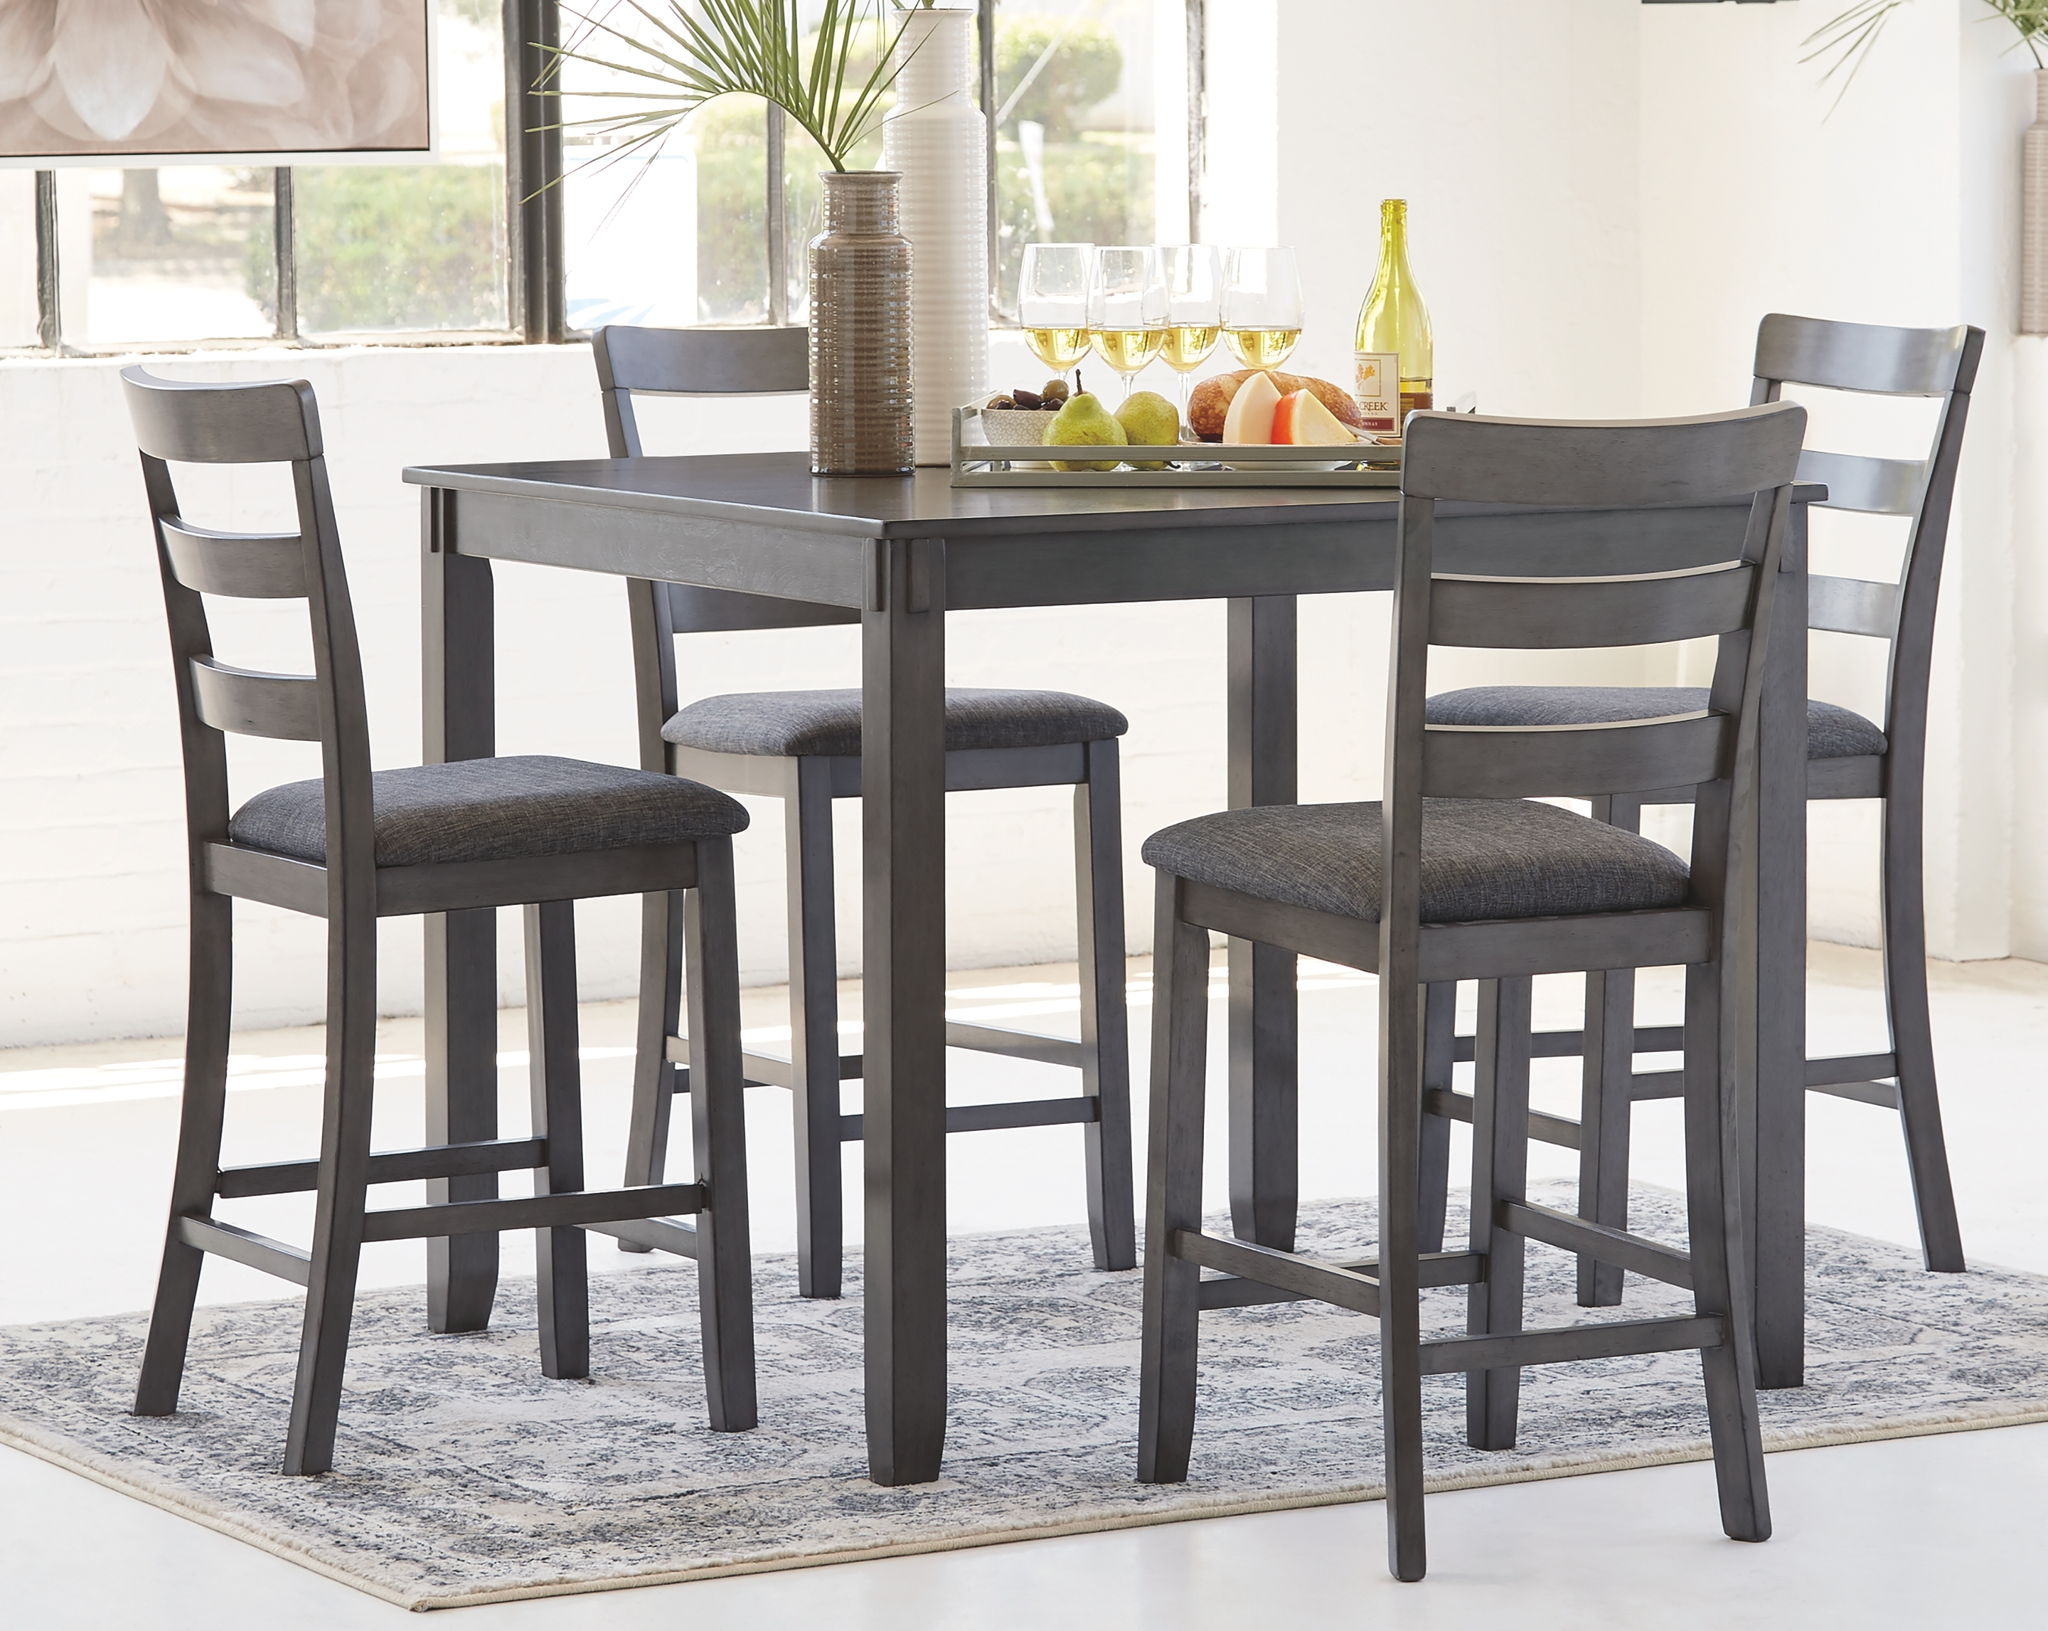 dining room table with stools